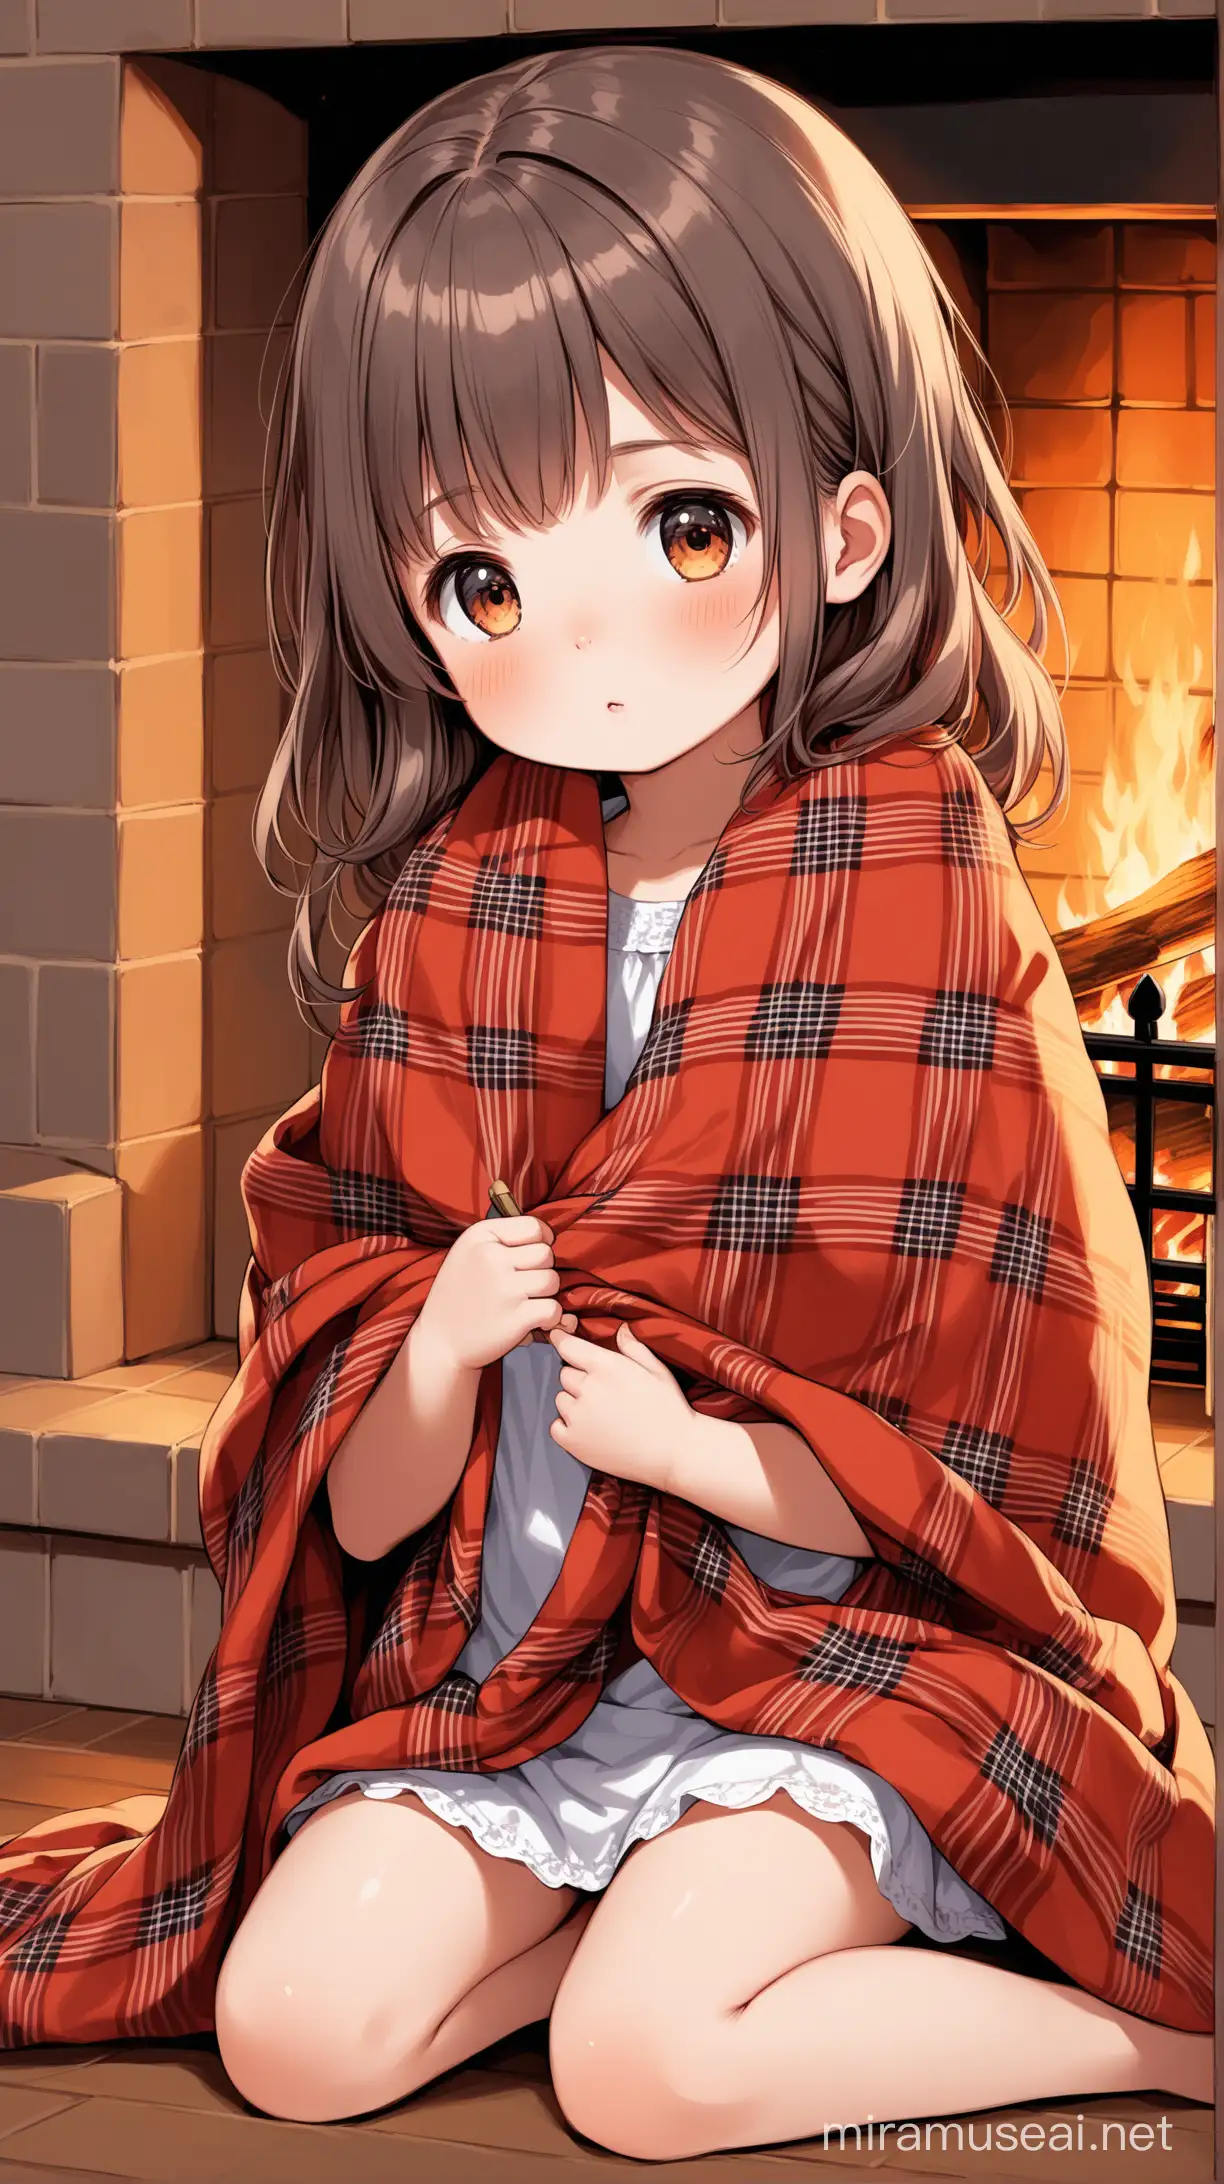 Child in Plaid Blanket Gazing at Fireplace